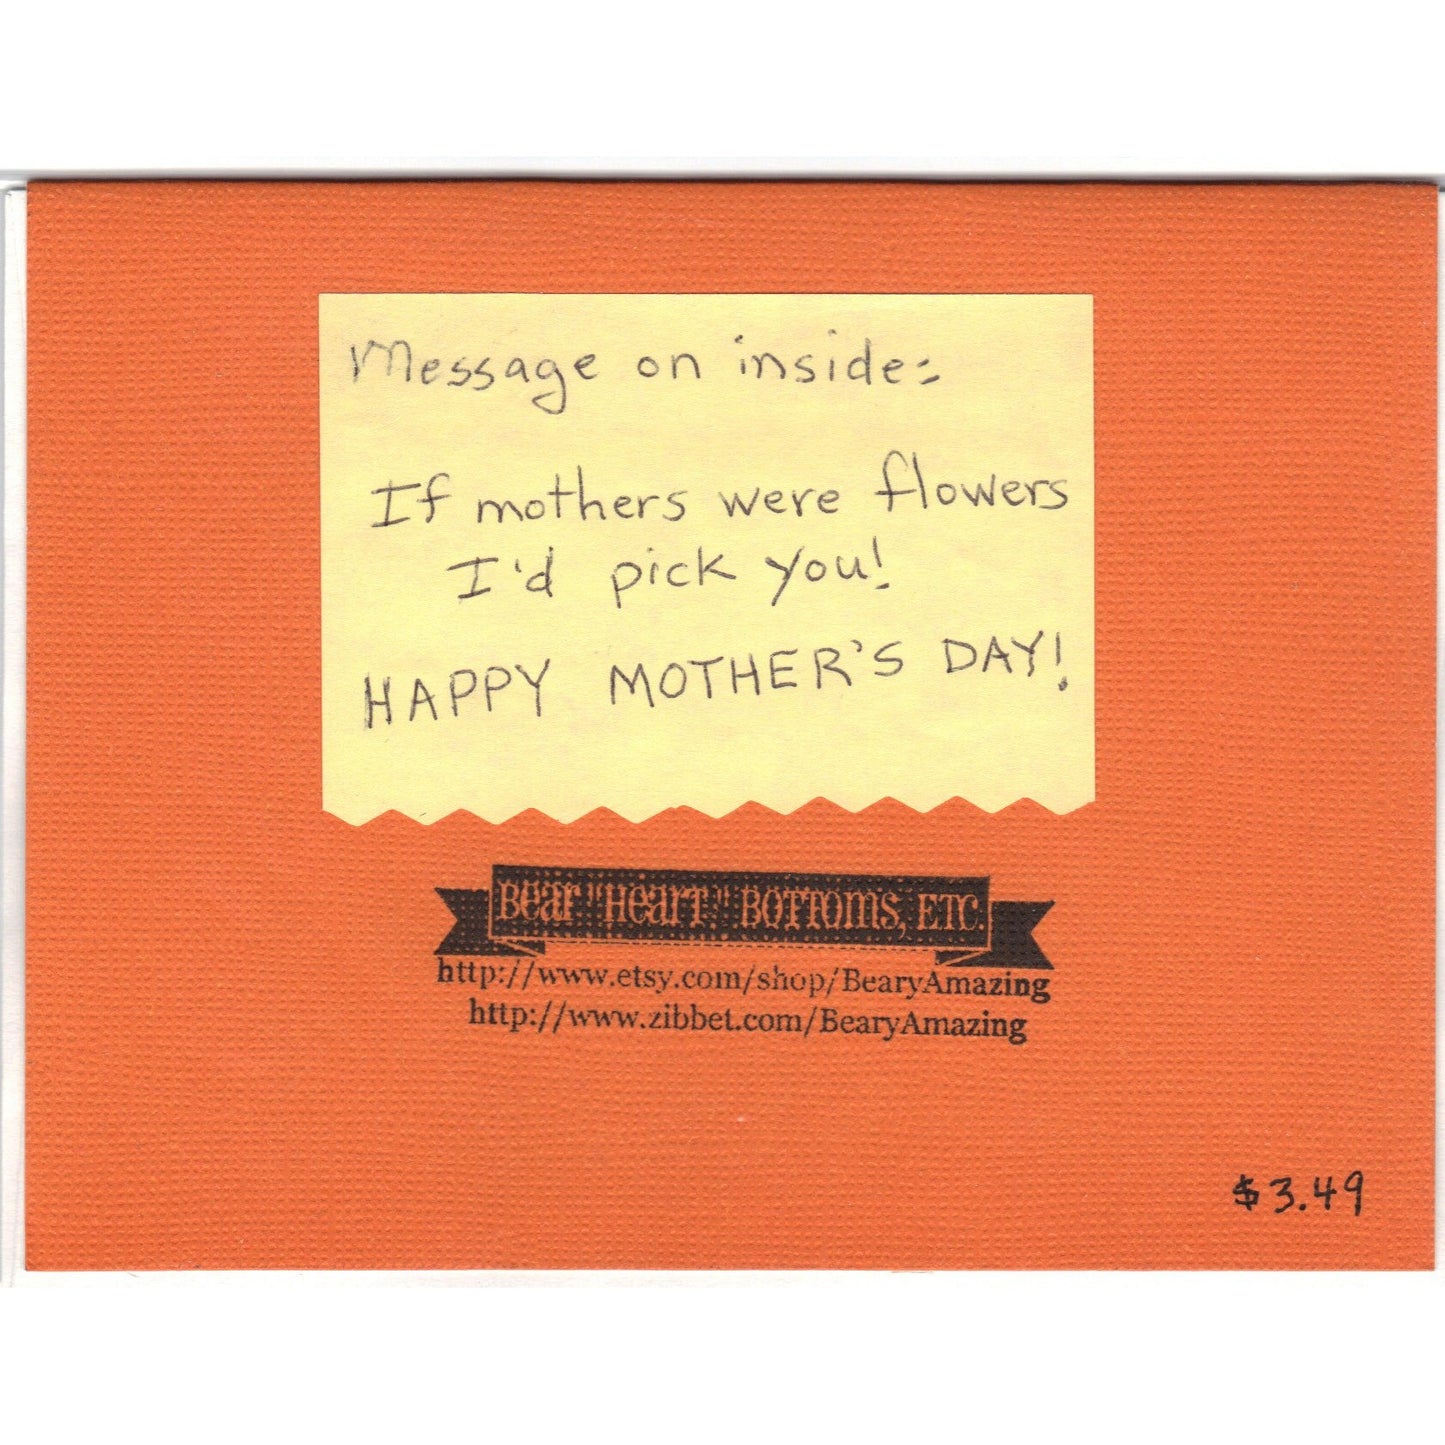 Mothers Day Handmade Good Greeting Supply Card - Cards And Other Paper Products - Made In U.S.A. - SharPharMade - 2